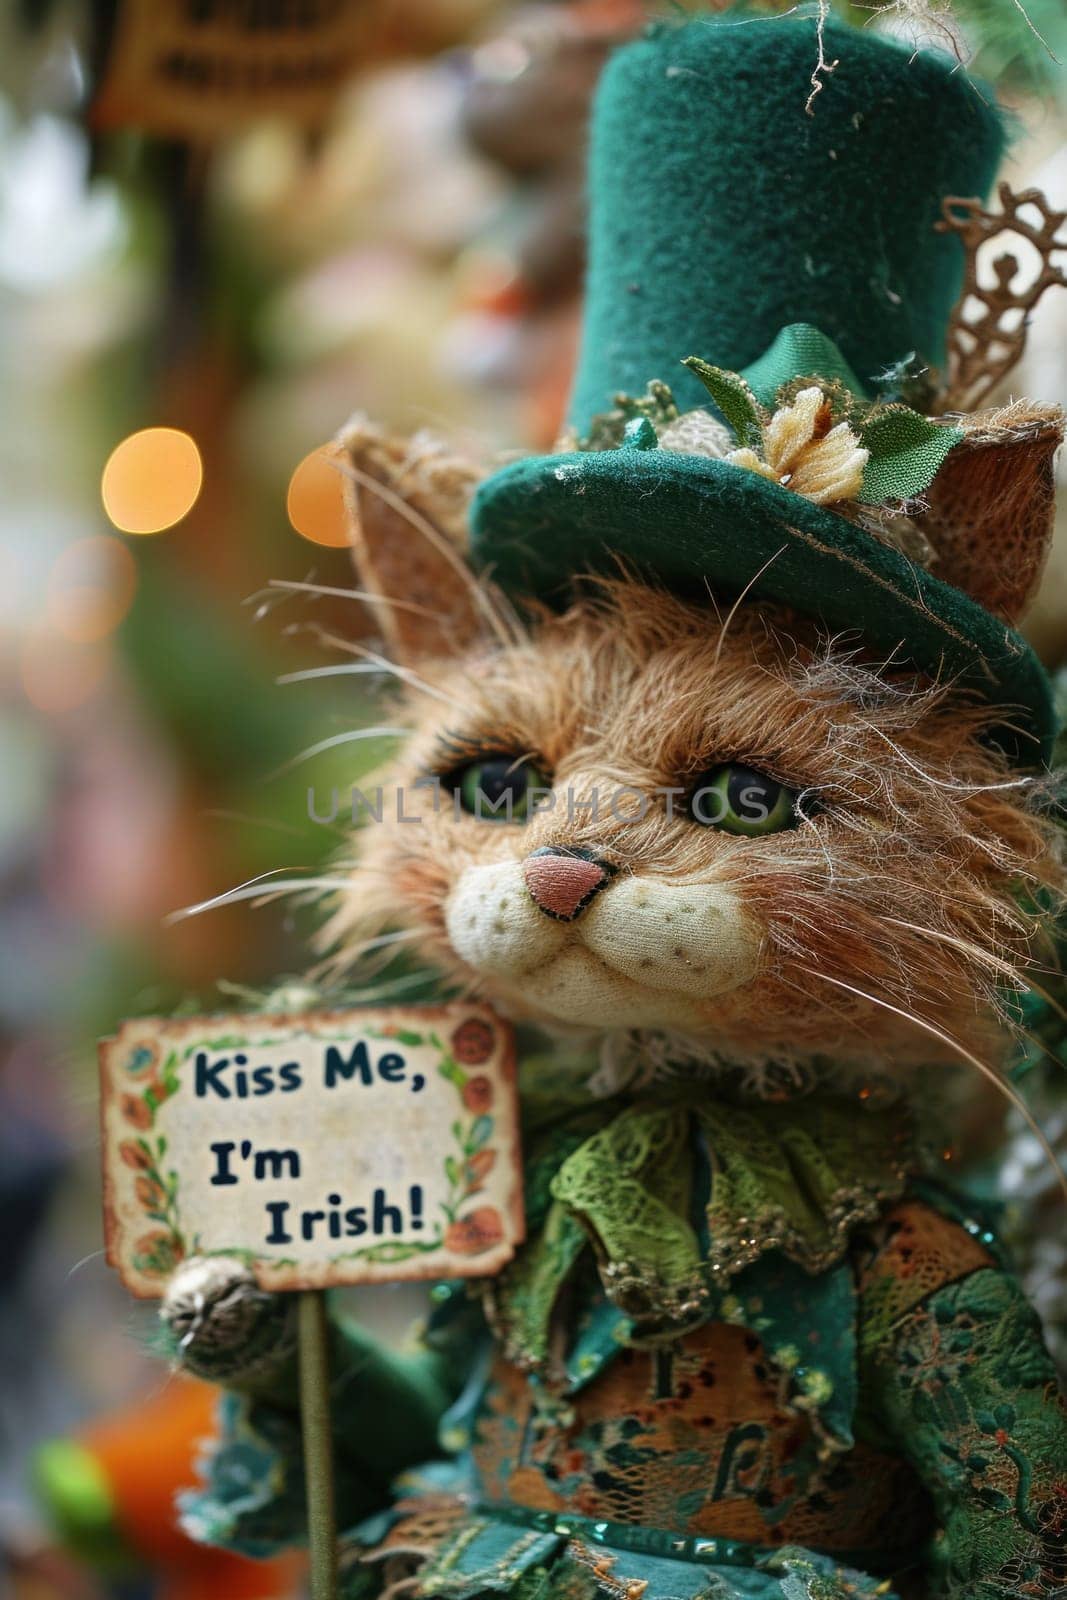 A cat dressed in a green hat and holding up an irish sign, AI by starush